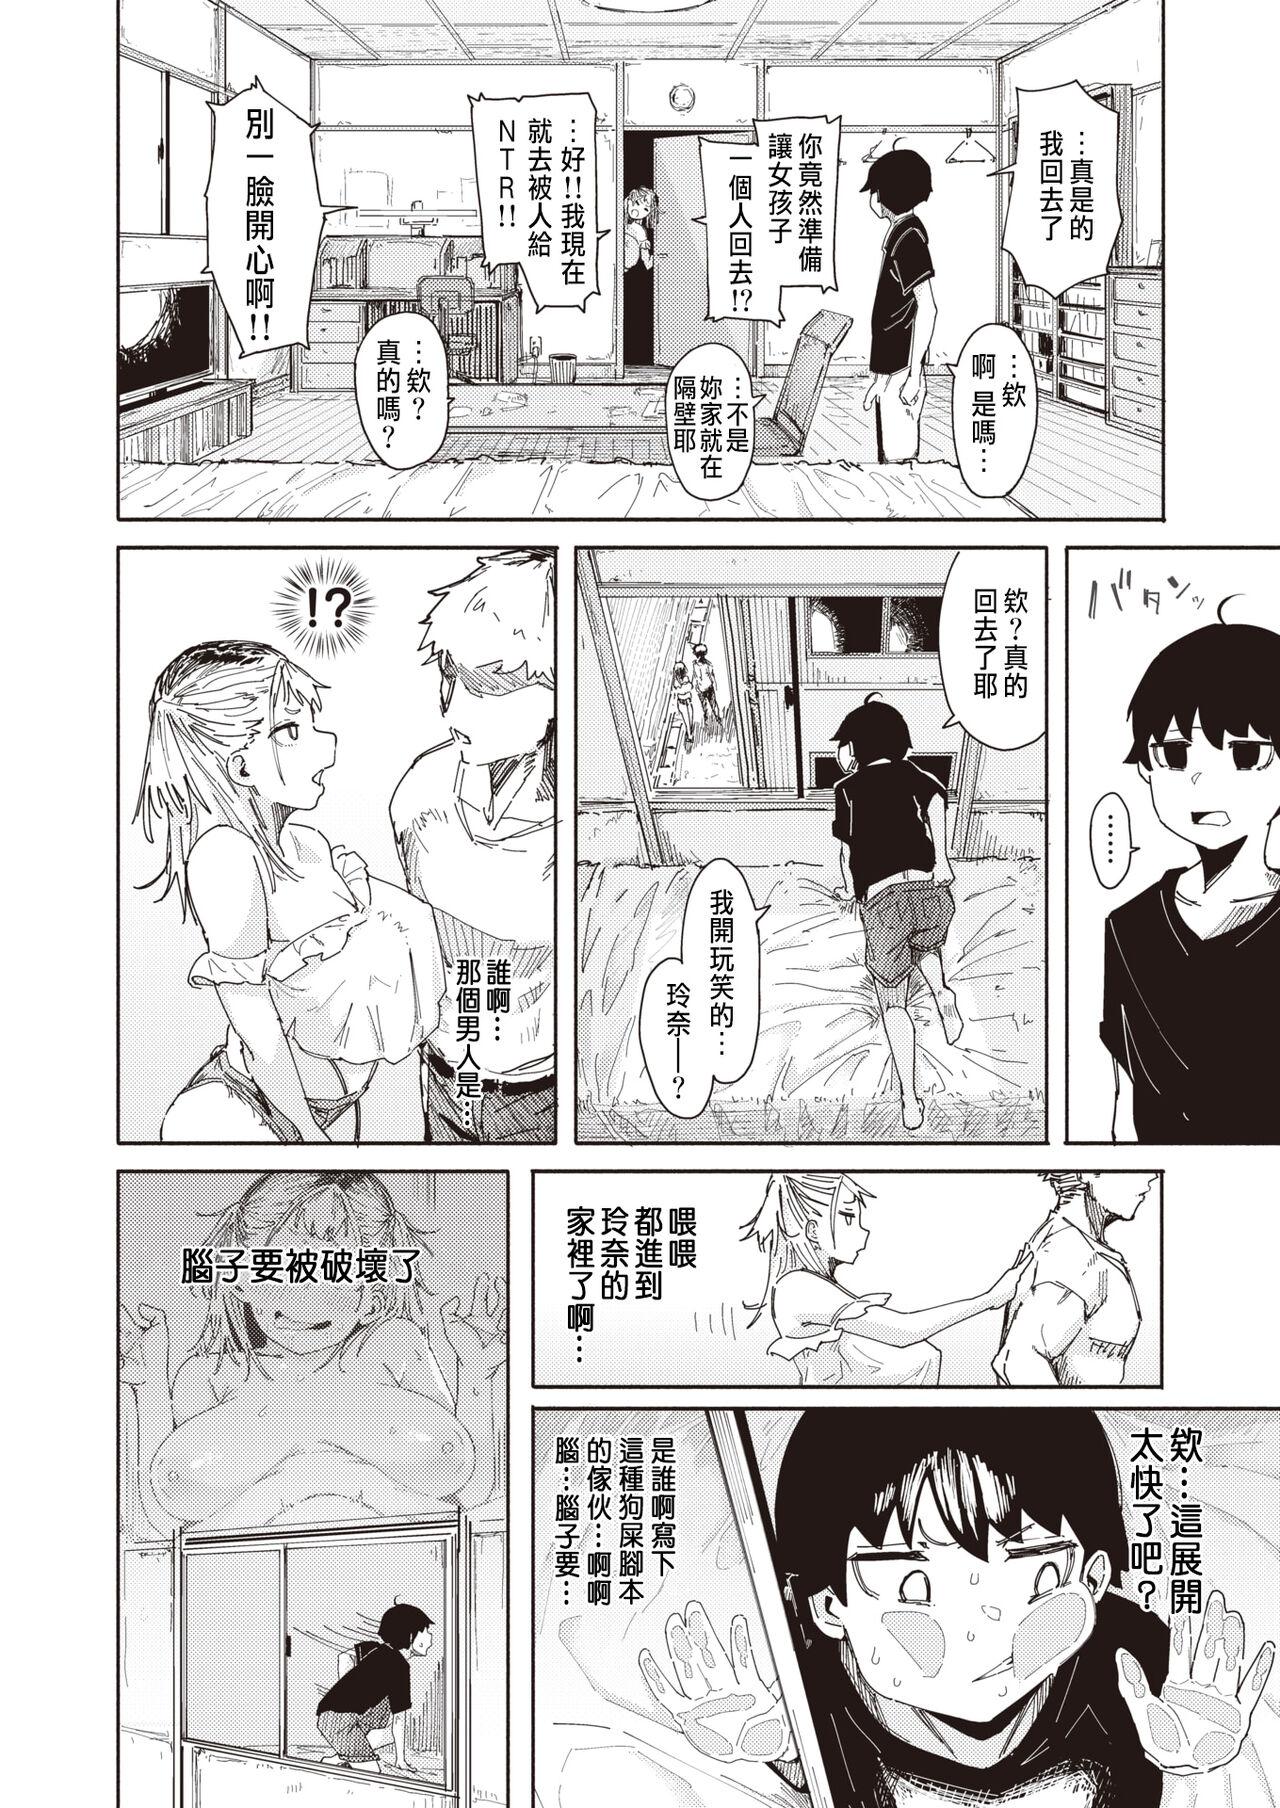 Ass Fucked エロ漫画すぎる幼馴染 Chinese - Page 10